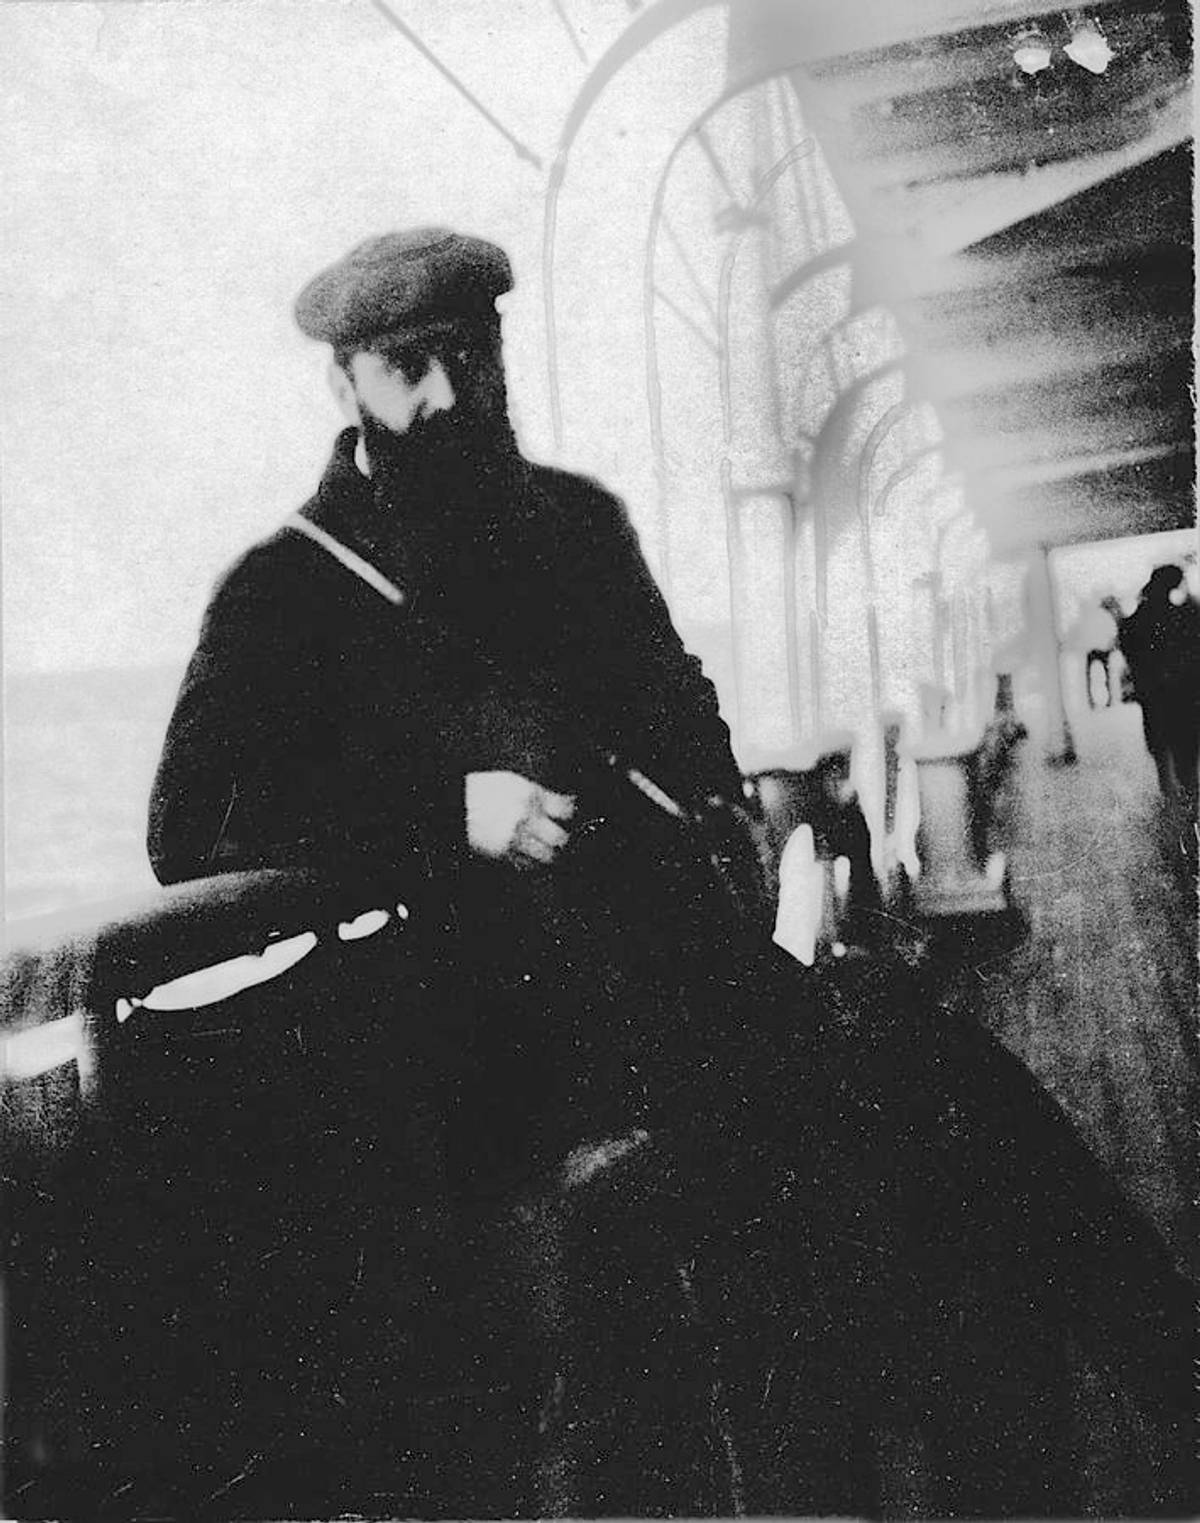 Herzl on board a vessel reaching the shores of Palestine, October 26, 1898. (Wikimedia)